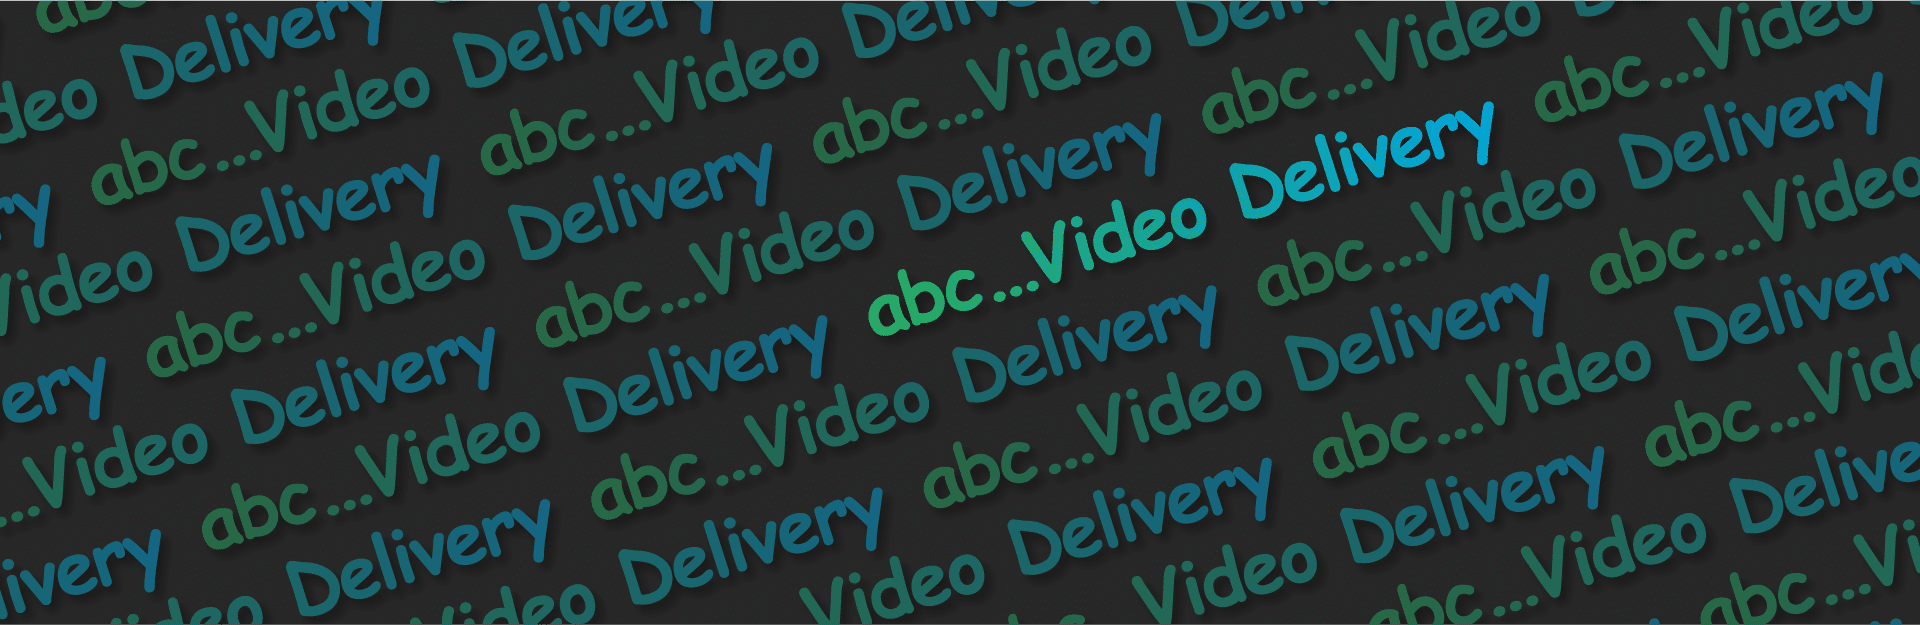 The glossary of video delivery